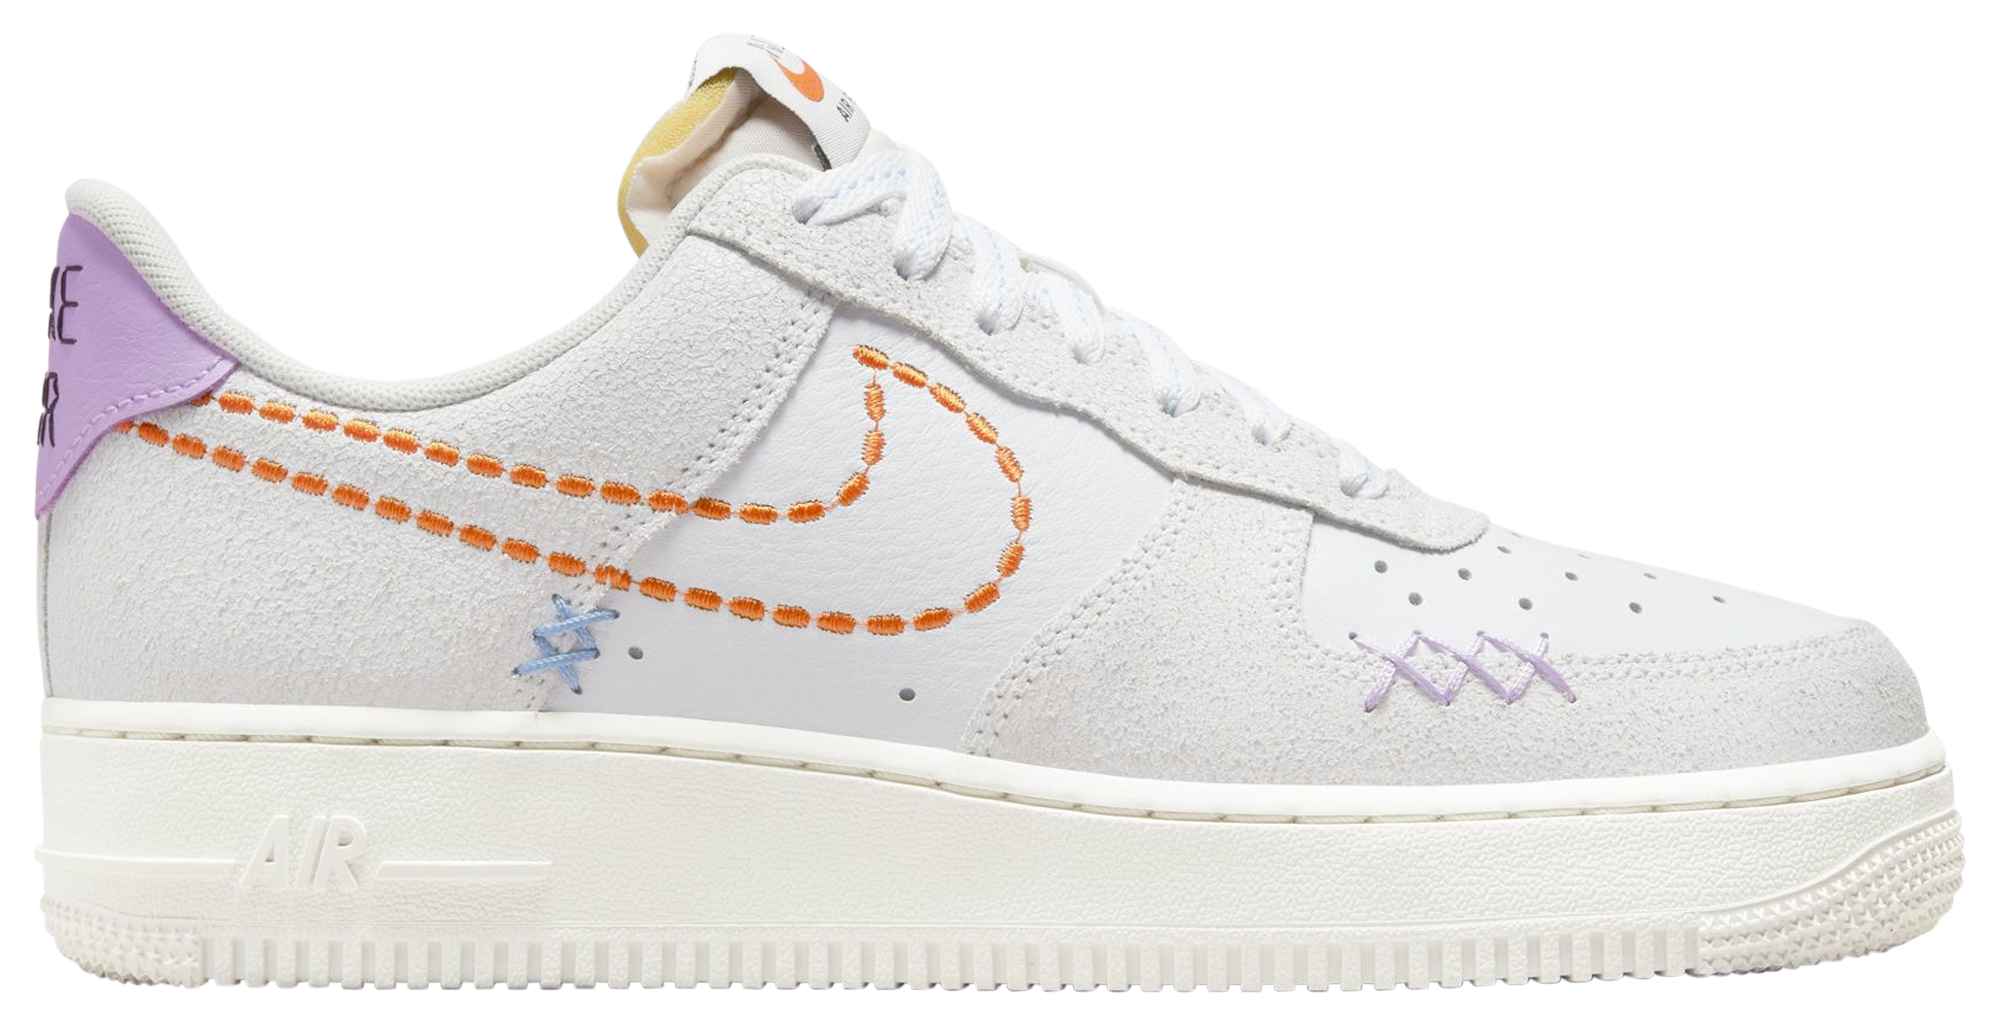 Nike Women's Air Force 1 '07 Shoes, White/Safety